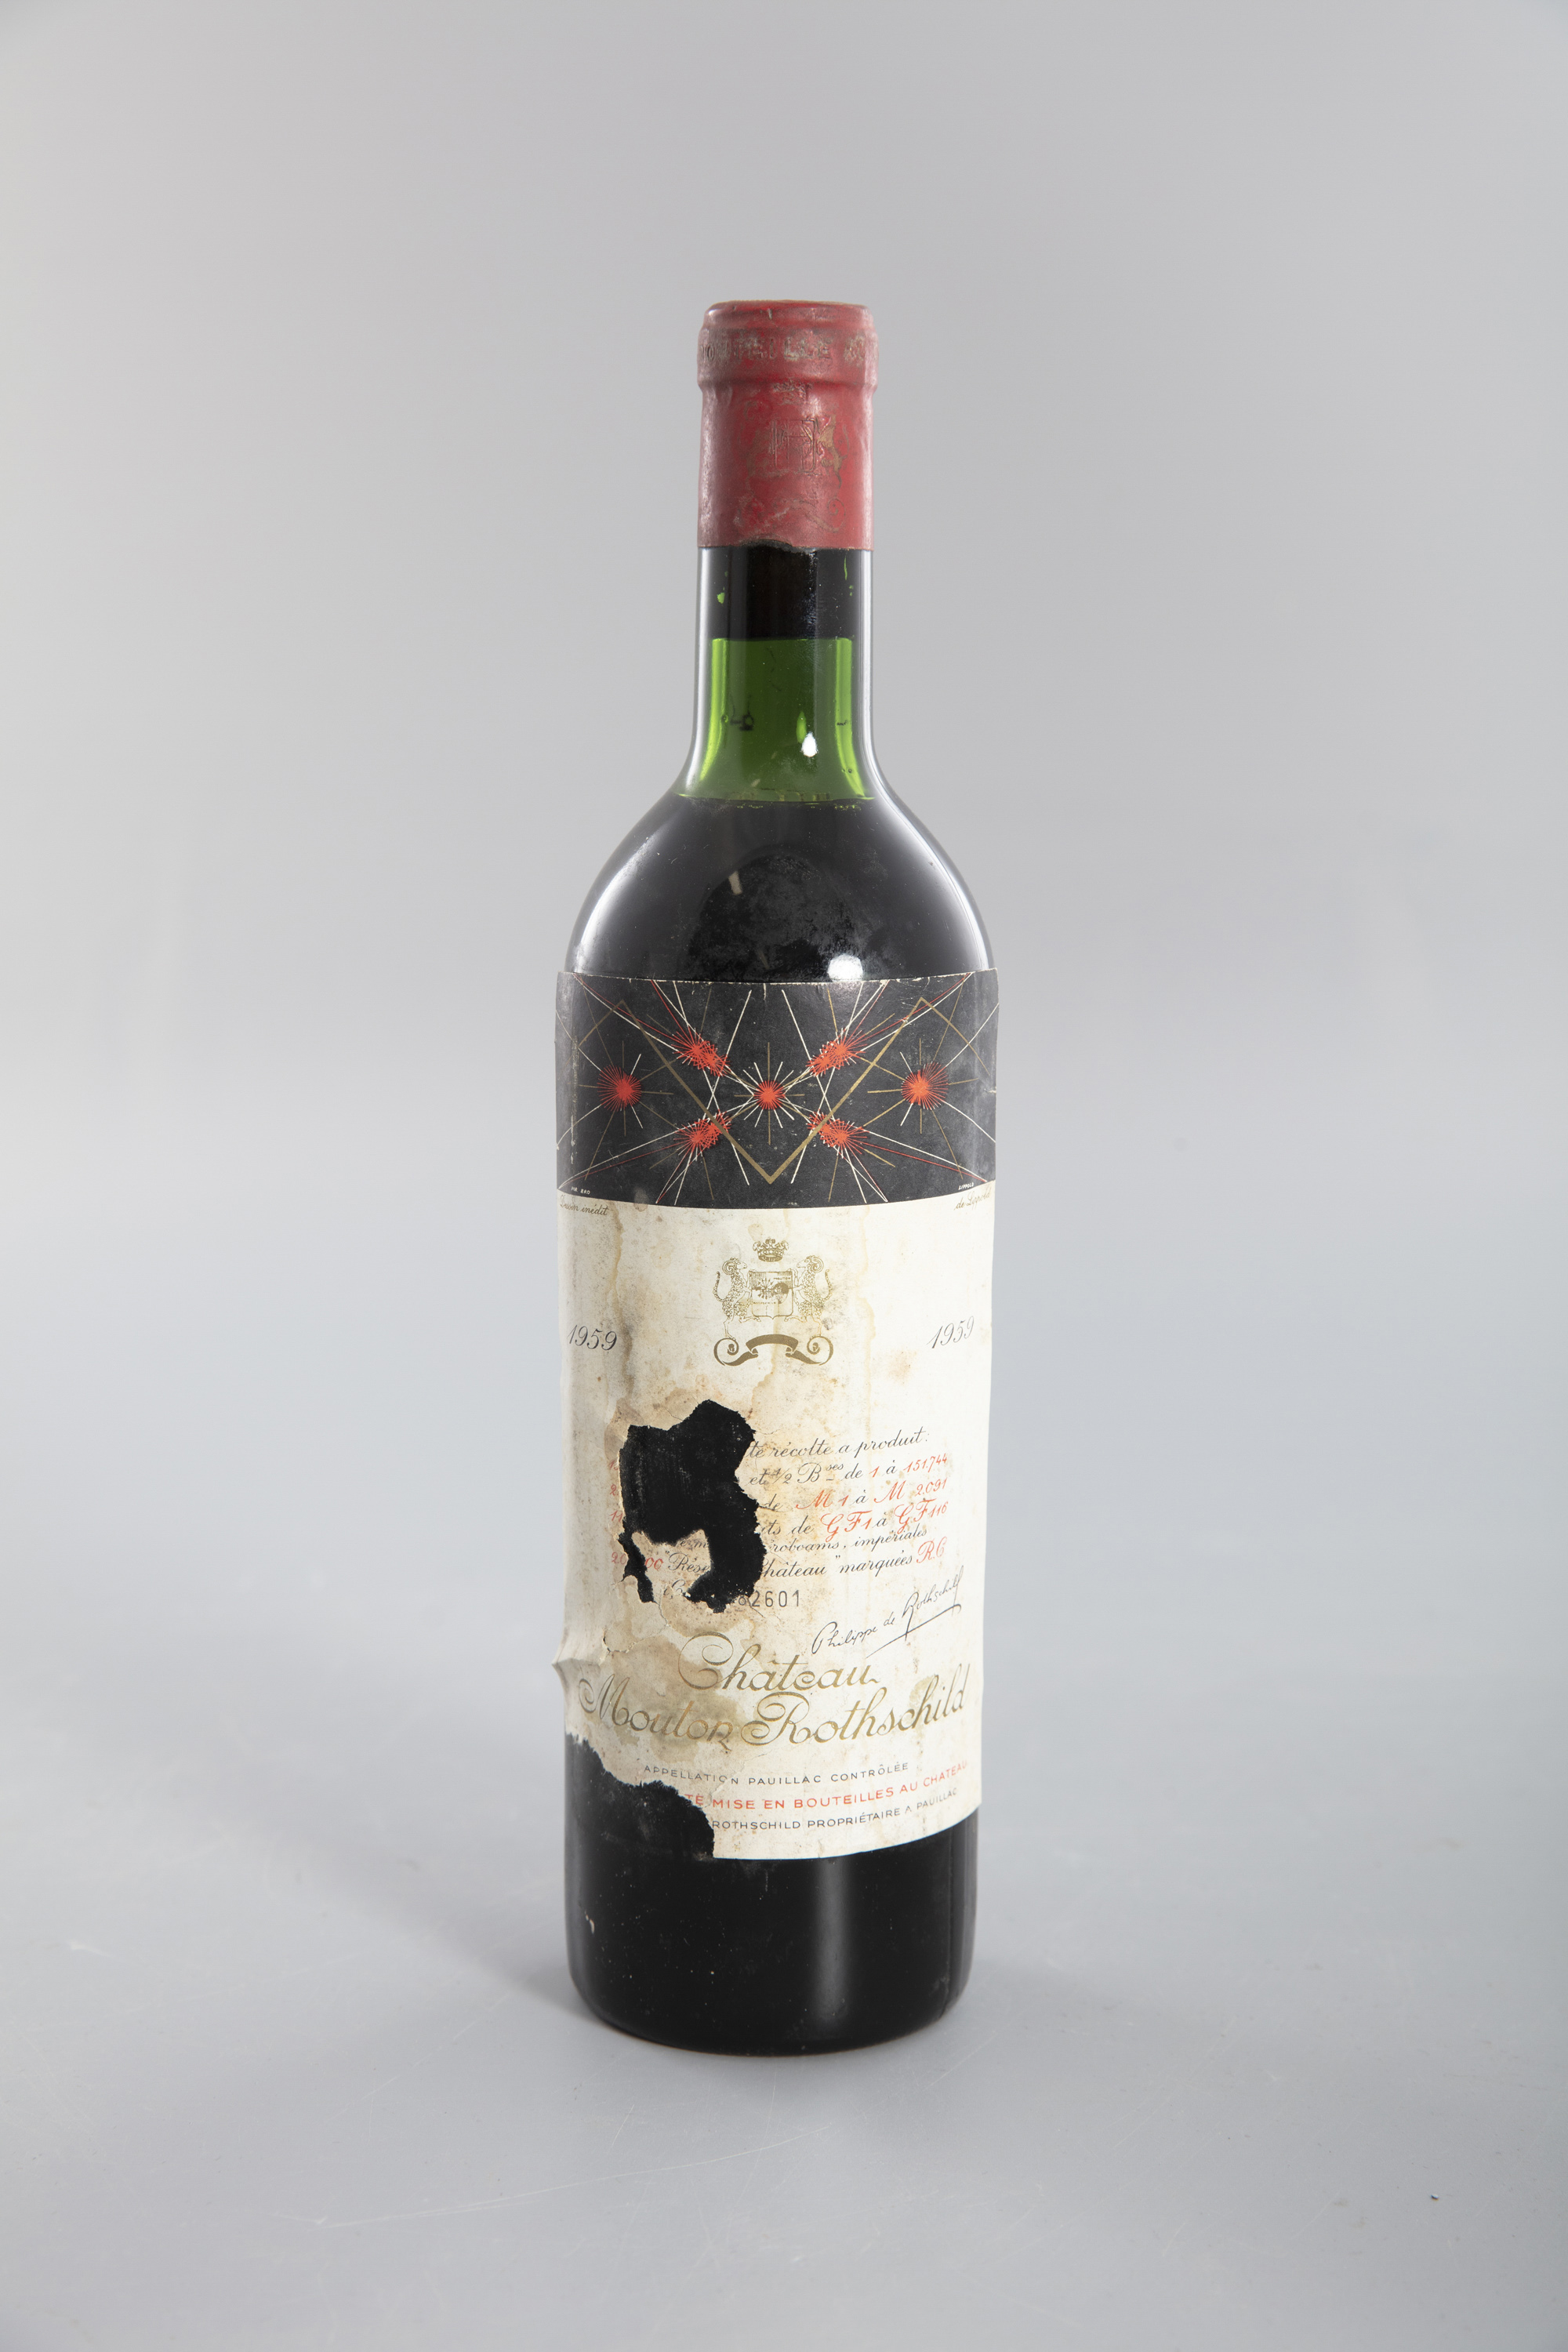 CHATEAU MOUTON ROTHSCHILD Pauillac, 1959 1 bottle and one unmarked - Image 7 of 7